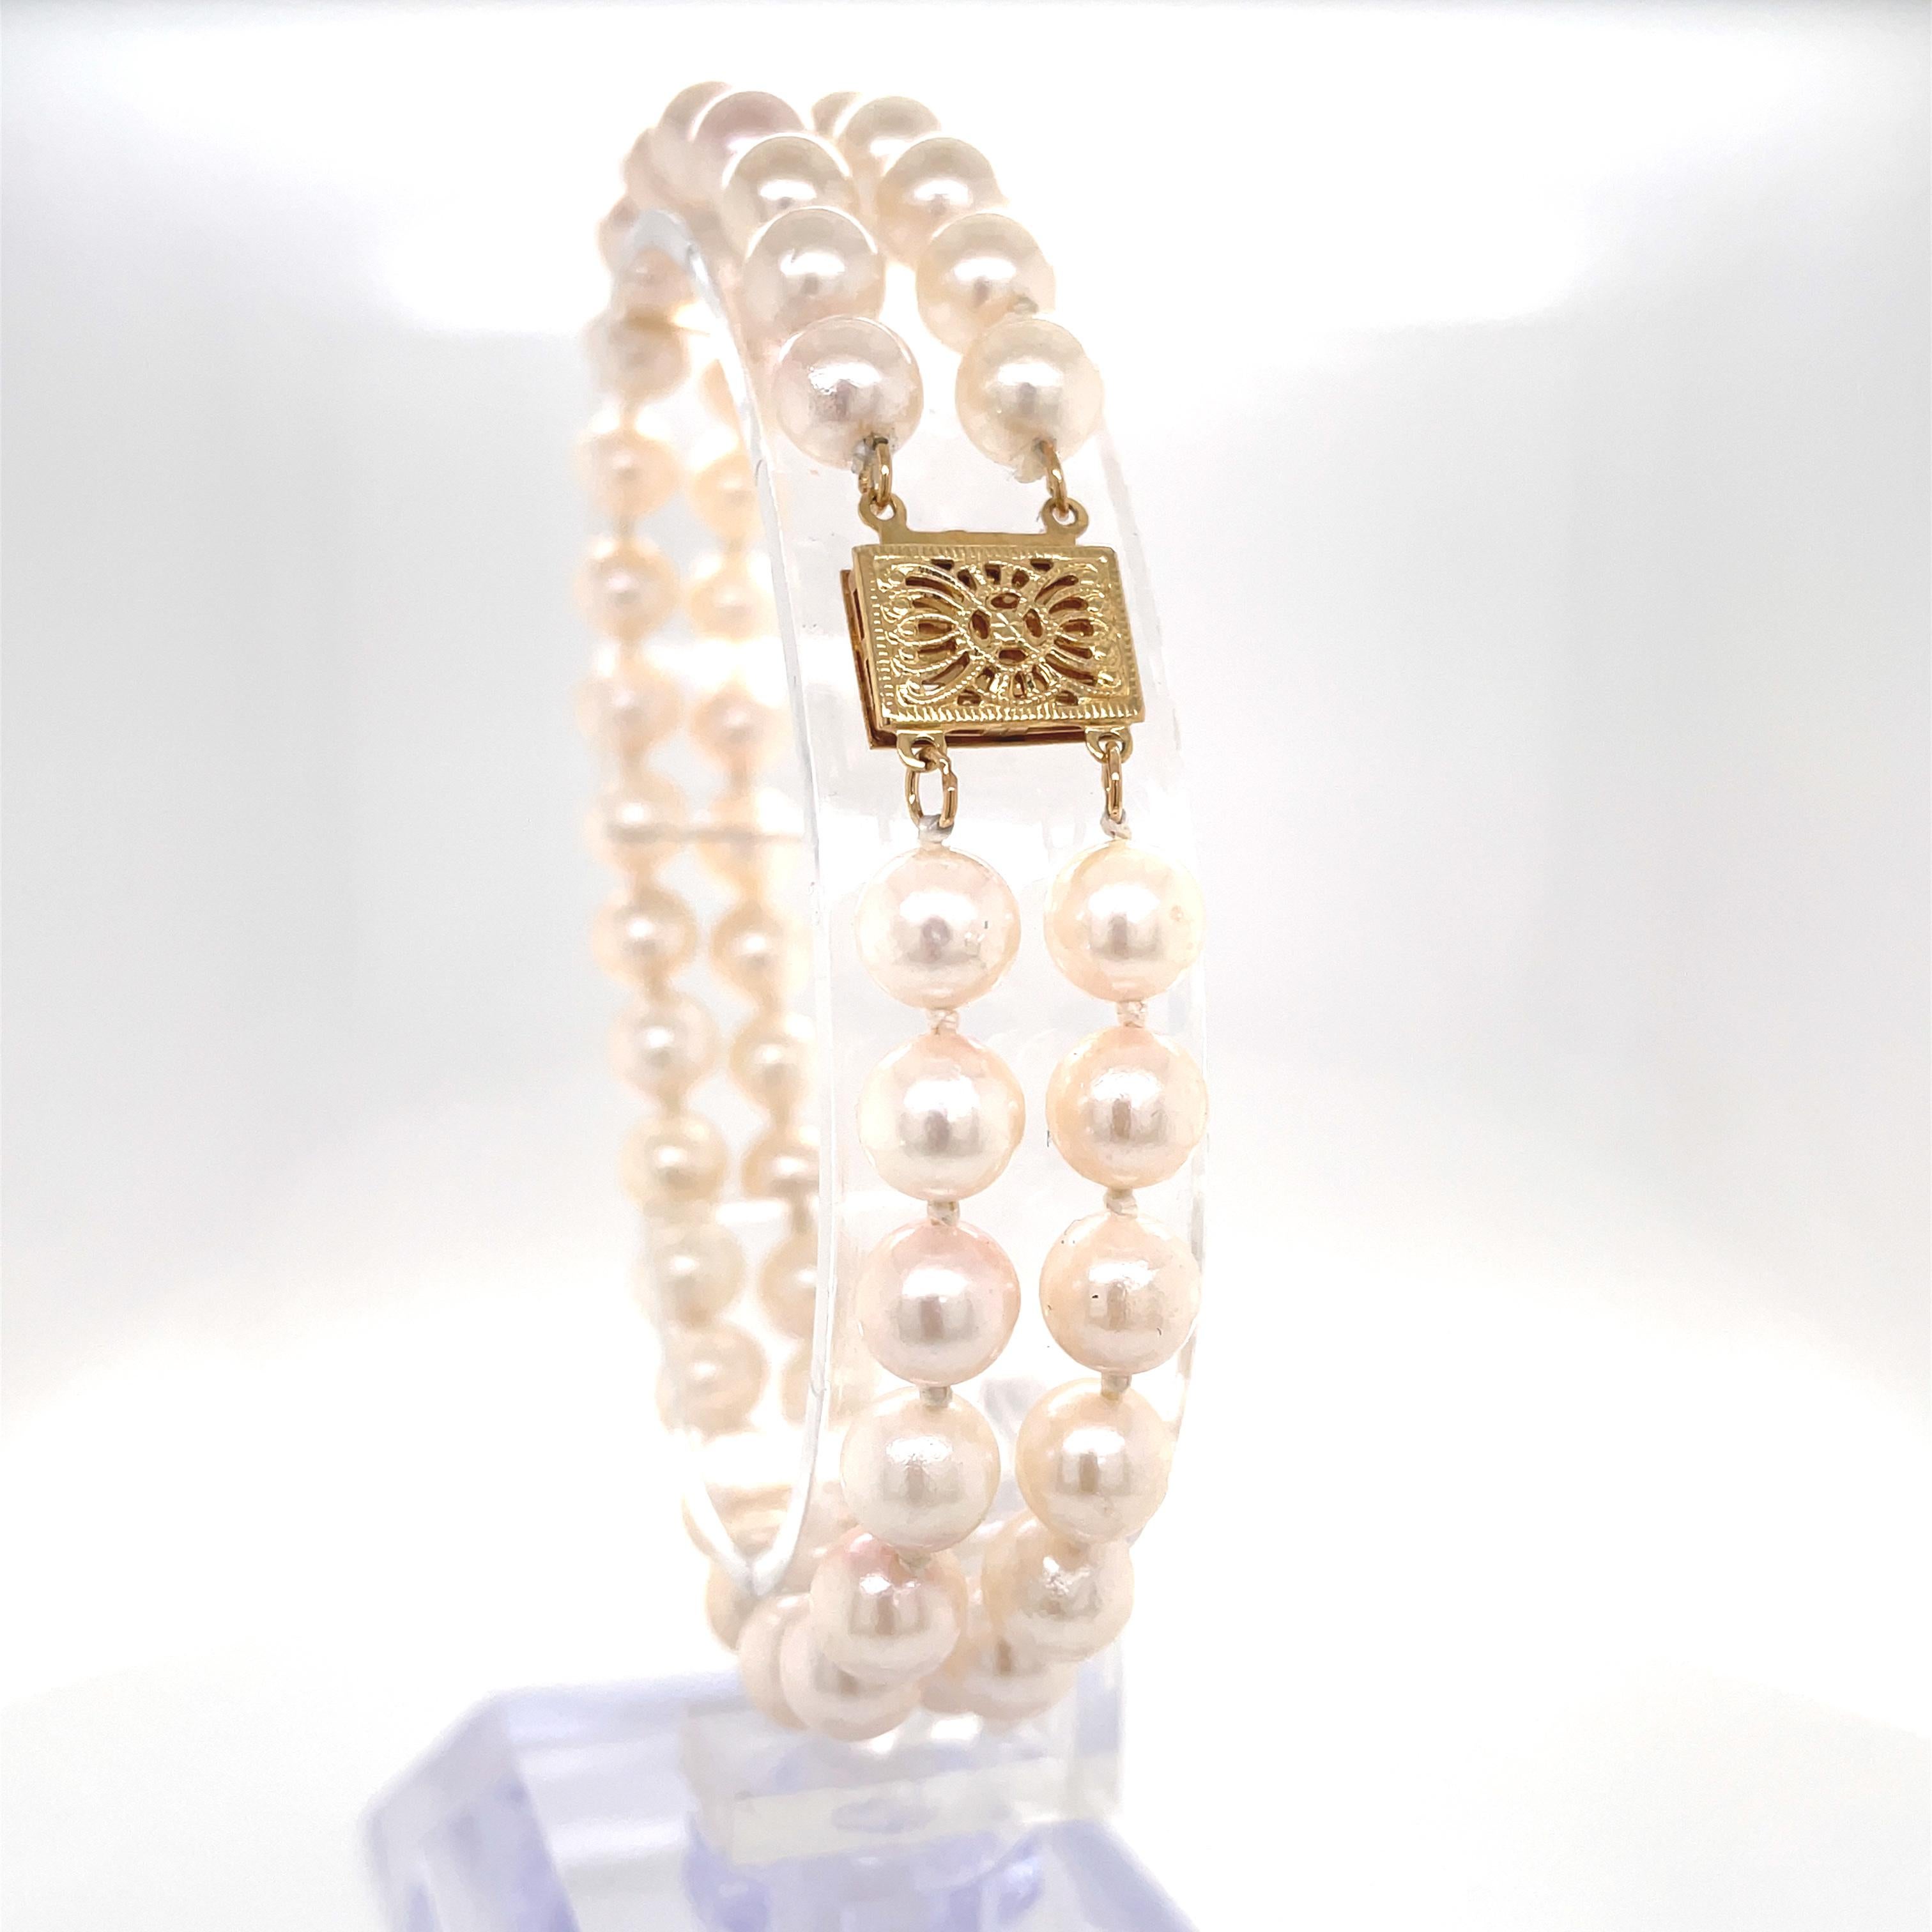 Enhanced with a decorative 14 karat yellow gold filigree charm clasp, this classic double strand bracelet of creamy white pearls presents a fresh modern layered look.
Lustrous pearls measuring approximately 5.8mm - 5.9mm are hand strung and knotted